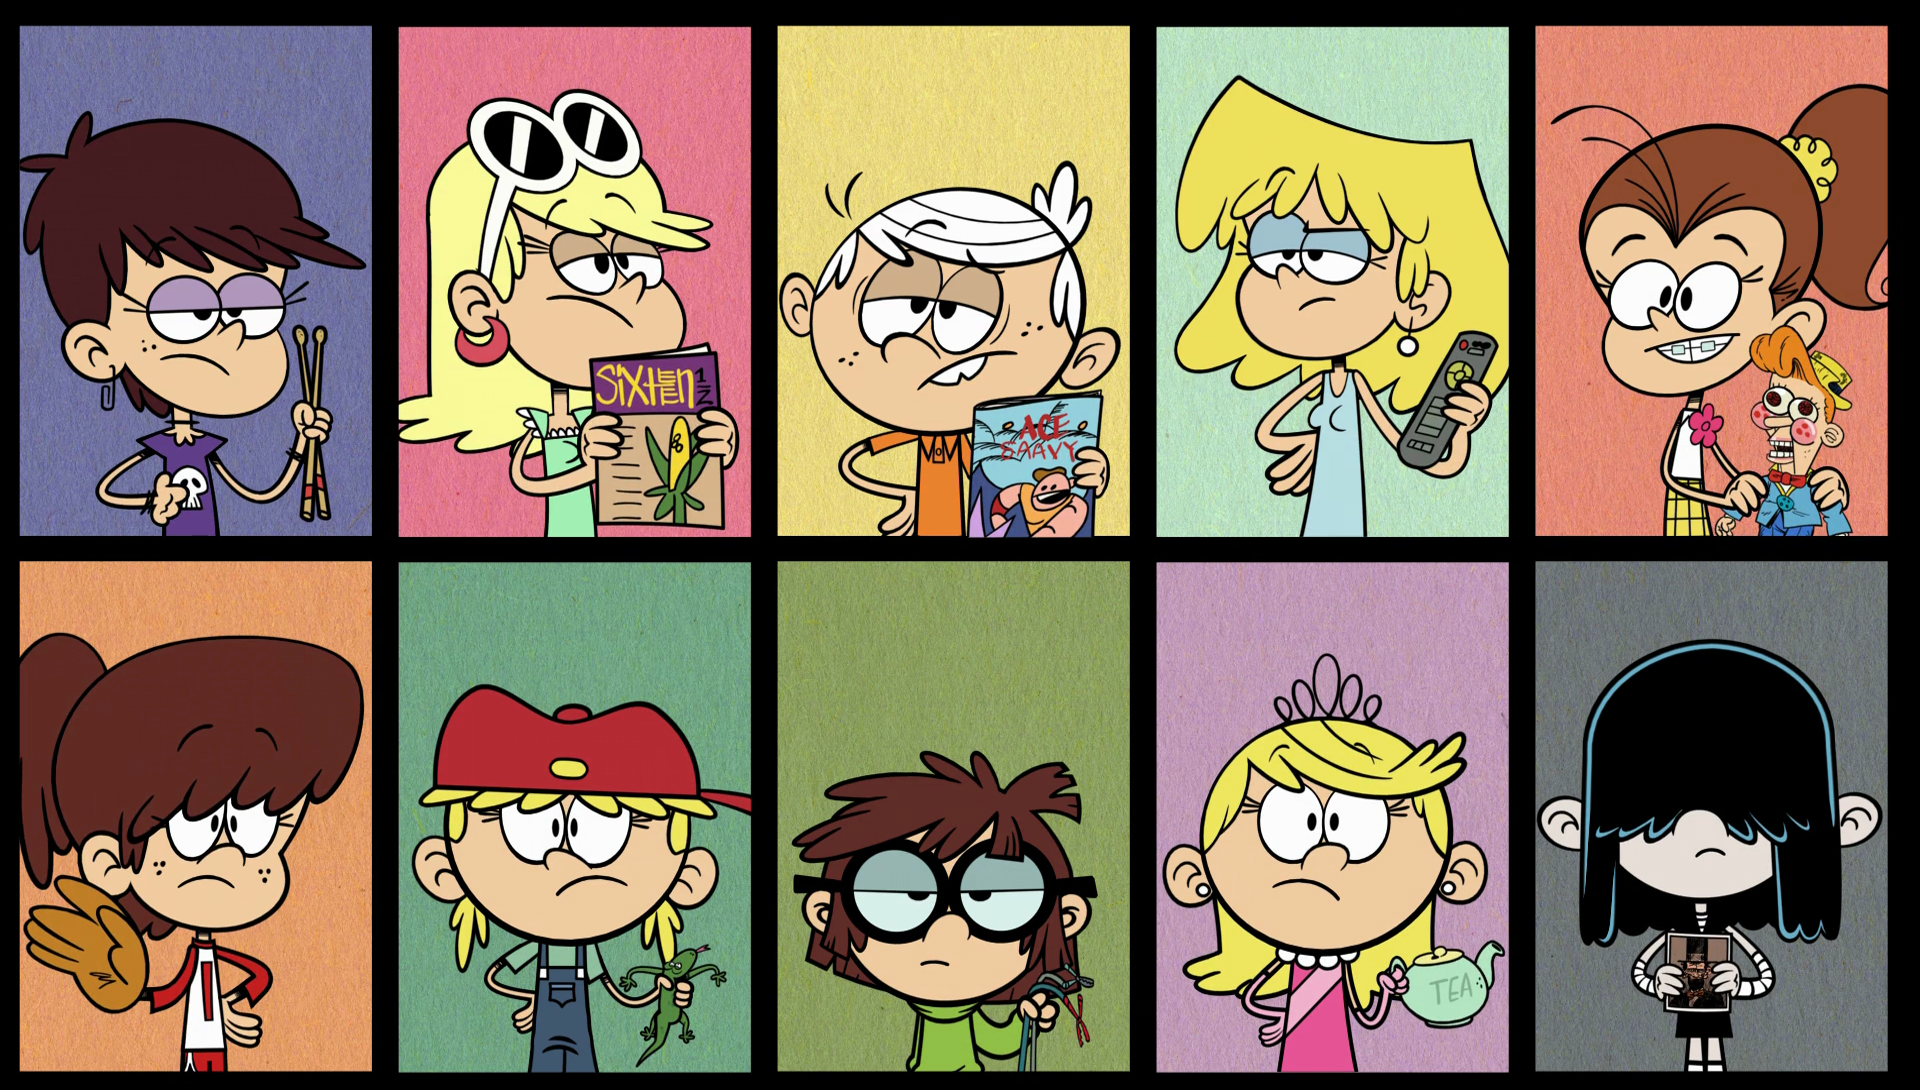 Changing The Baby Gallery. The Loud House Encyclopedia In 2021. Loud House Characters, The Loud House Fanart, Baby Gallery